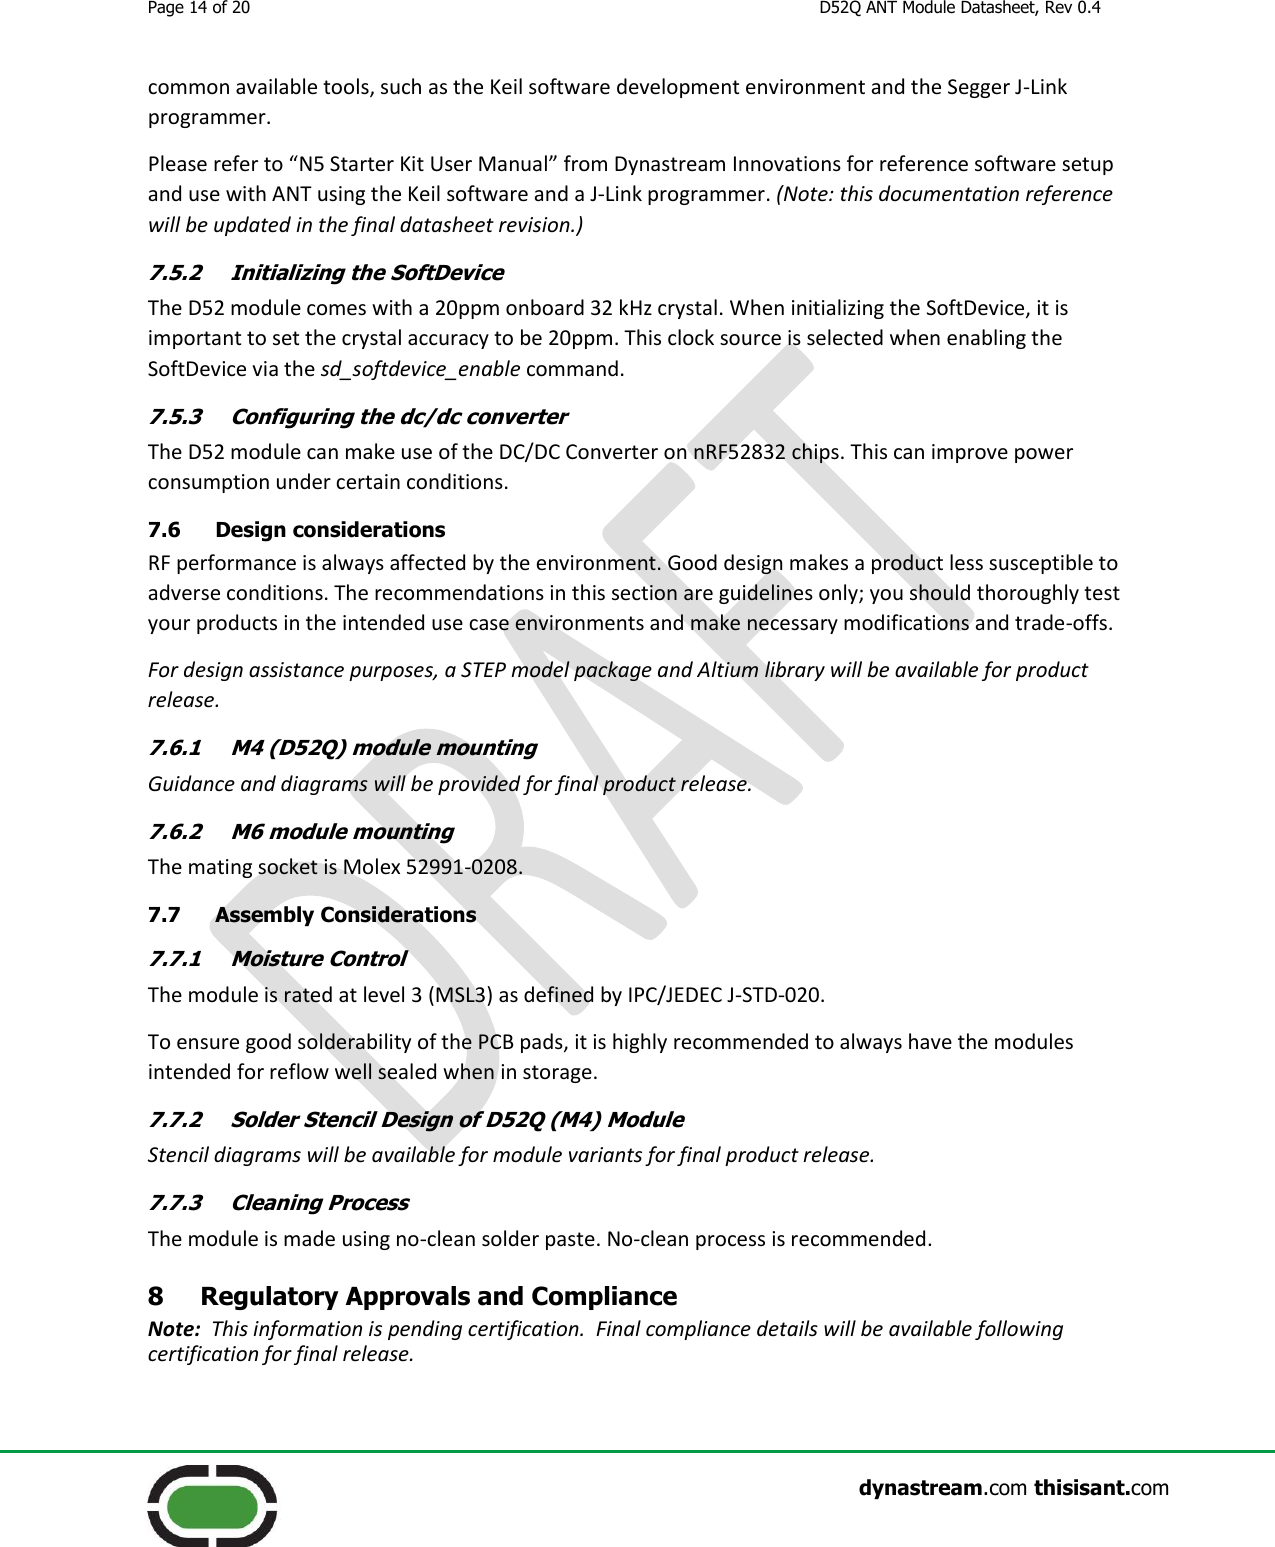 Page 14 of 20  D52Q ANT Module Datasheet, Rev 0.4                    dynastream.com thisisant.com common available tools, such as the Keil software development environment and the Segger J-Link programmer. Please refer to “N5 Starter Kit User Manual” from Dynastream Innovations for reference software setup and use with ANT using the Keil software and a J-Link programmer. (Note: this documentation reference will be updated in the final datasheet revision.) 7.5.2 Initializing the SoftDevice The D52 module comes with a 20ppm onboard 32 kHz crystal. When initializing the SoftDevice, it is important to set the crystal accuracy to be 20ppm. This clock source is selected when enabling the SoftDevice via the sd_softdevice_enable command. 7.5.3 Configuring the dc/dc converter The D52 module can make use of the DC/DC Converter on nRF52832 chips. This can improve power consumption under certain conditions. 7.6 Design considerations RF performance is always affected by the environment. Good design makes a product less susceptible to adverse conditions. The recommendations in this section are guidelines only; you should thoroughly test your products in the intended use case environments and make necessary modifications and trade-offs. For design assistance purposes, a STEP model package and Altium library will be available for product release. 7.6.1 M4 (D52Q) module mounting Guidance and diagrams will be provided for final product release. 7.6.2 M6 module mounting The mating socket is Molex 52991-0208. 7.7 Assembly Considerations 7.7.1 Moisture Control The module is rated at level 3 (MSL3) as defined by IPC/JEDEC J-STD-020.   To ensure good solderability of the PCB pads, it is highly recommended to always have the modules intended for reflow well sealed when in storage. 7.7.2 Solder Stencil Design of D52Q (M4) Module Stencil diagrams will be available for module variants for final product release. 7.7.3 Cleaning Process The module is made using no-clean solder paste. No-clean process is recommended. 8 Regulatory Approvals and Compliance Note:  This information is pending certification.  Final compliance details will be available following certification for final release. 